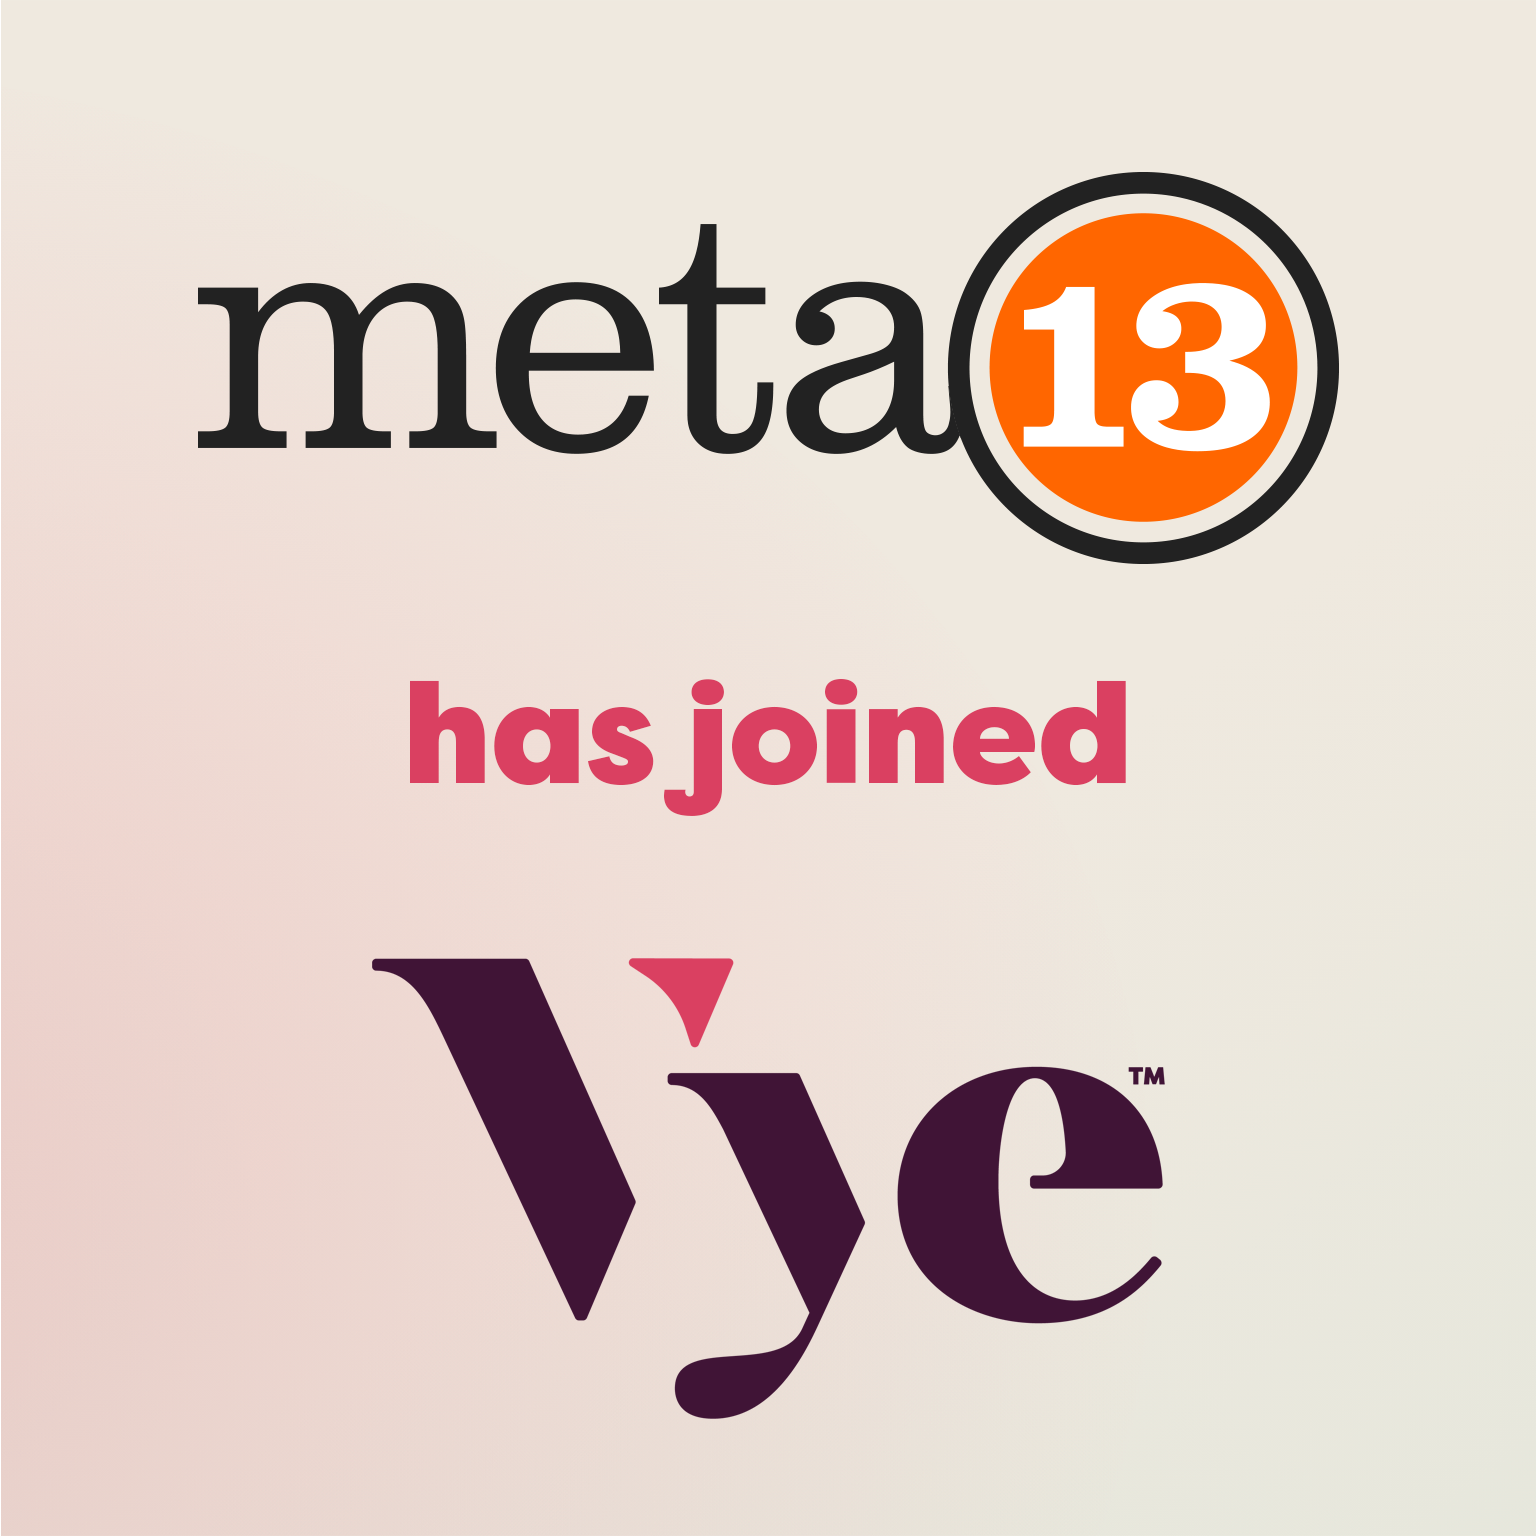 Meta 13 Joins Vye in Recent Acquisition